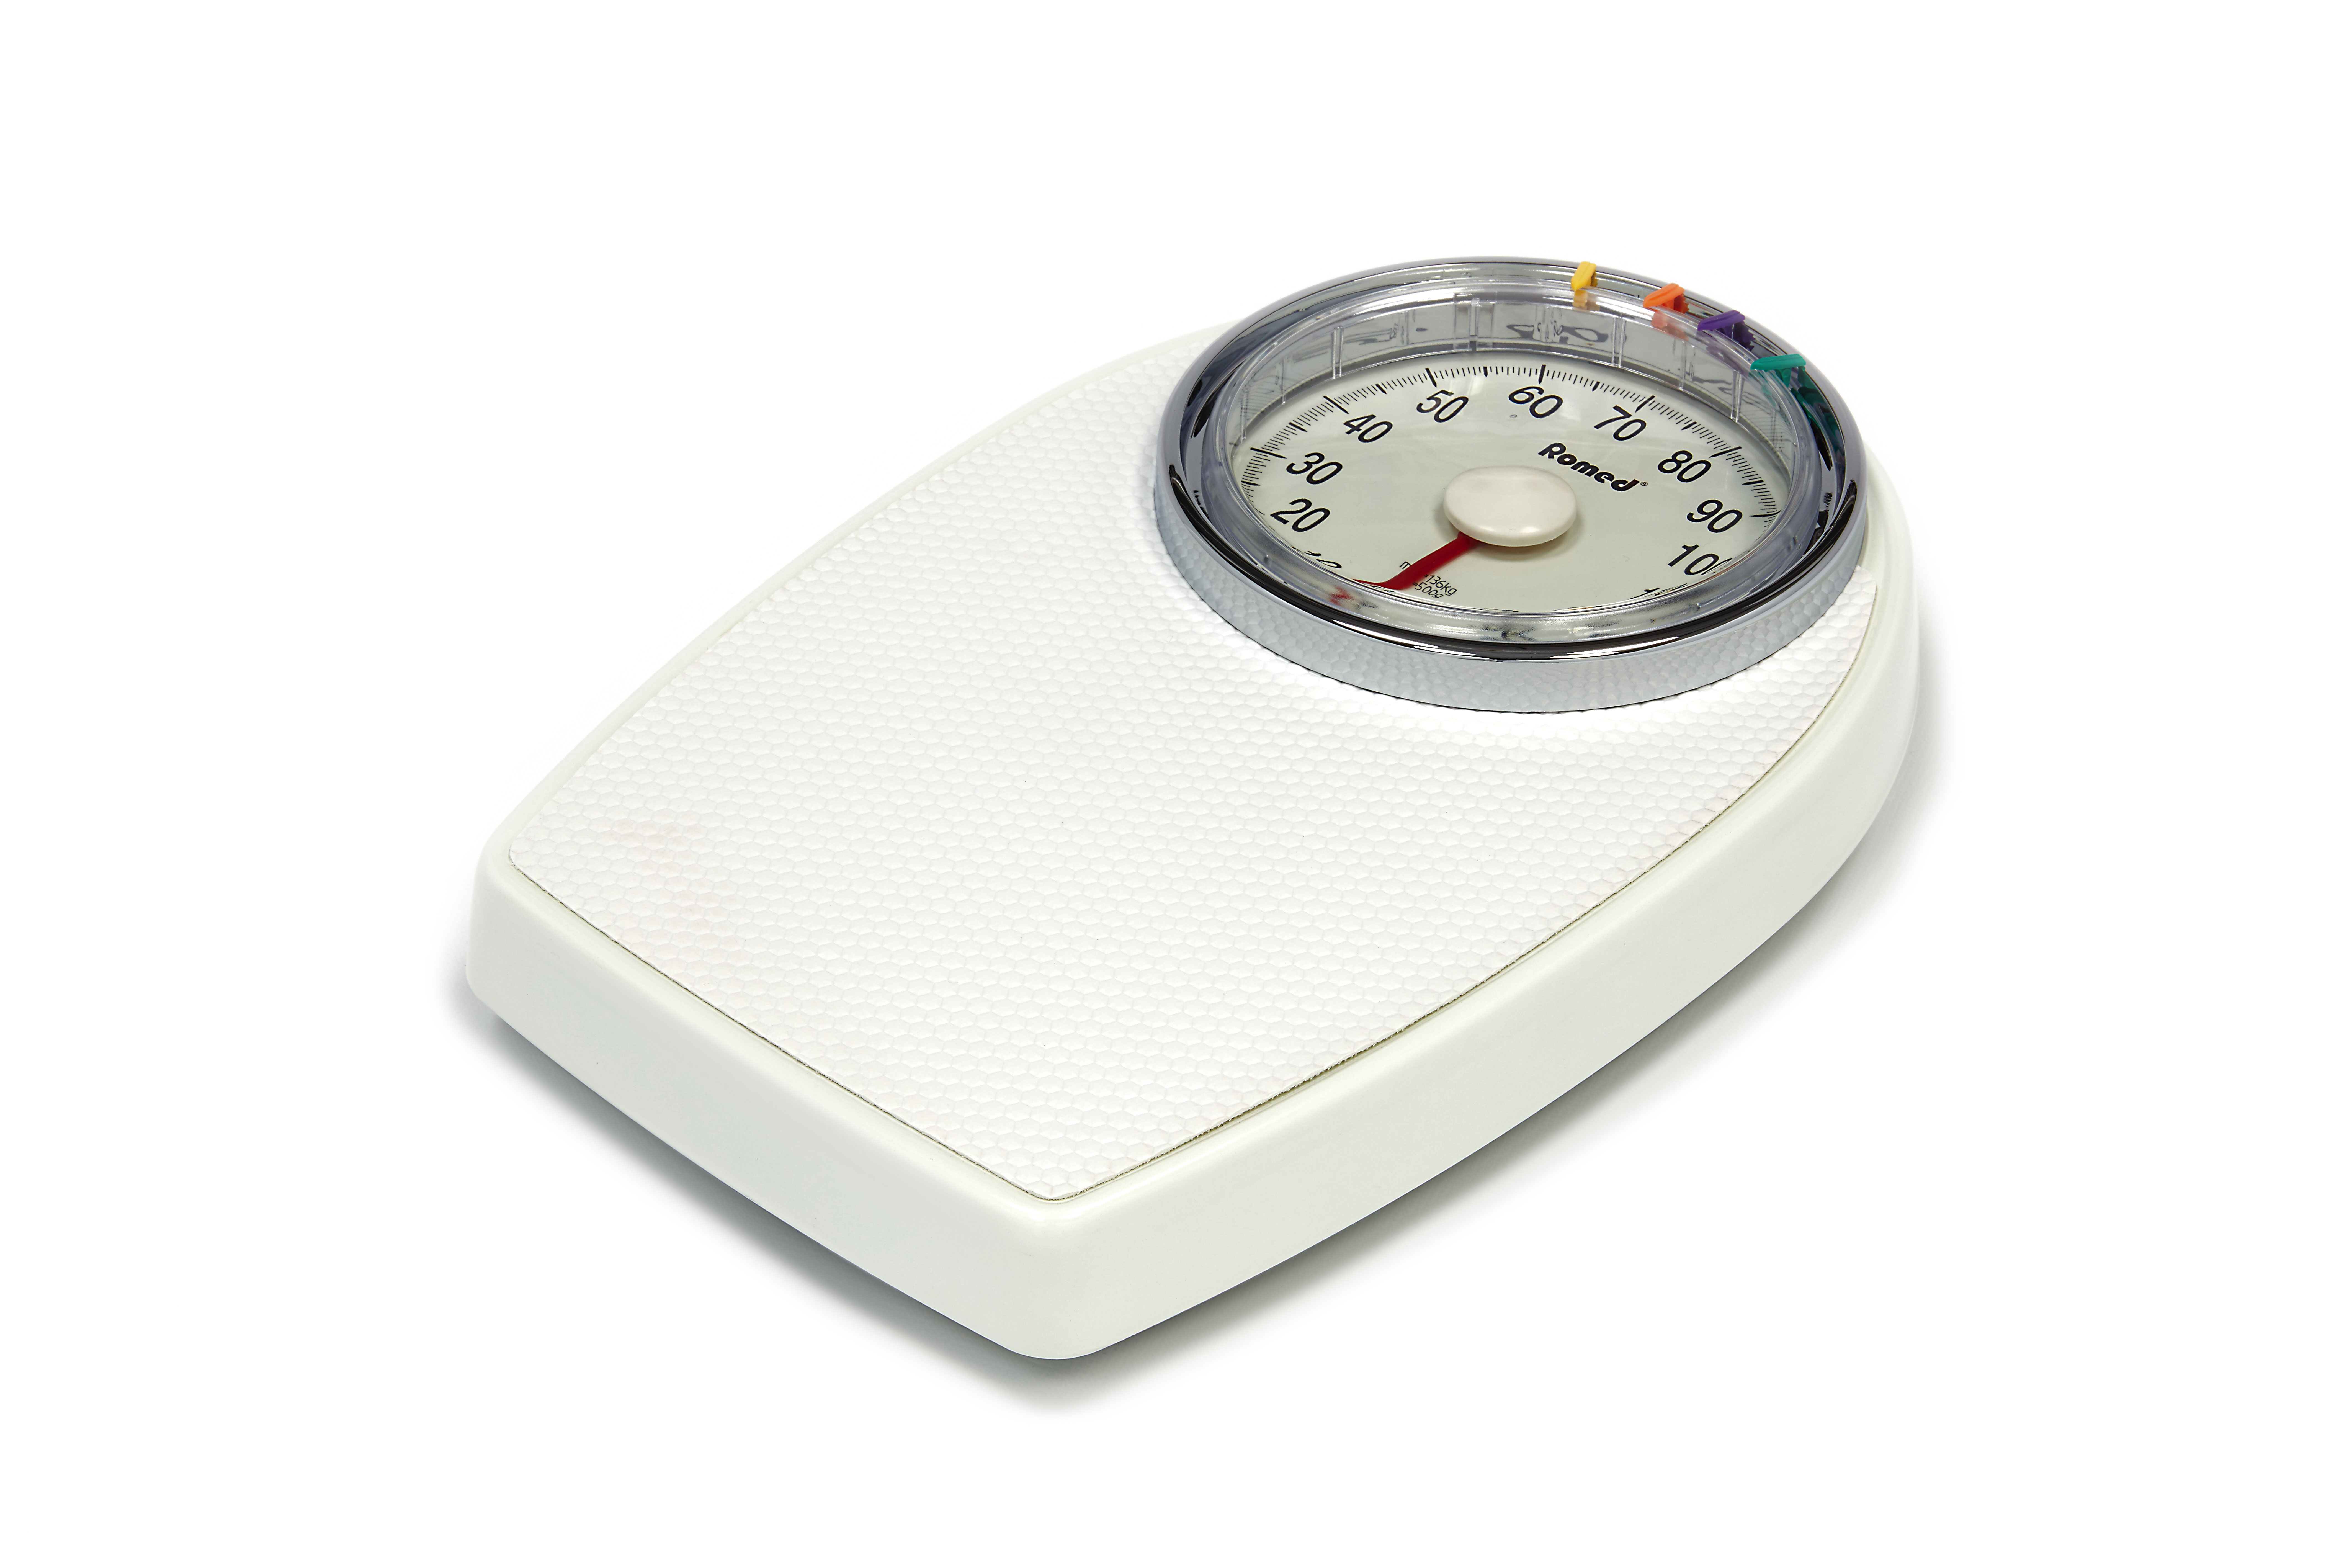 PS-001 Romed personal scales, mechanical type, white, packed per piece in an inner box, 3 pcs in a carton.